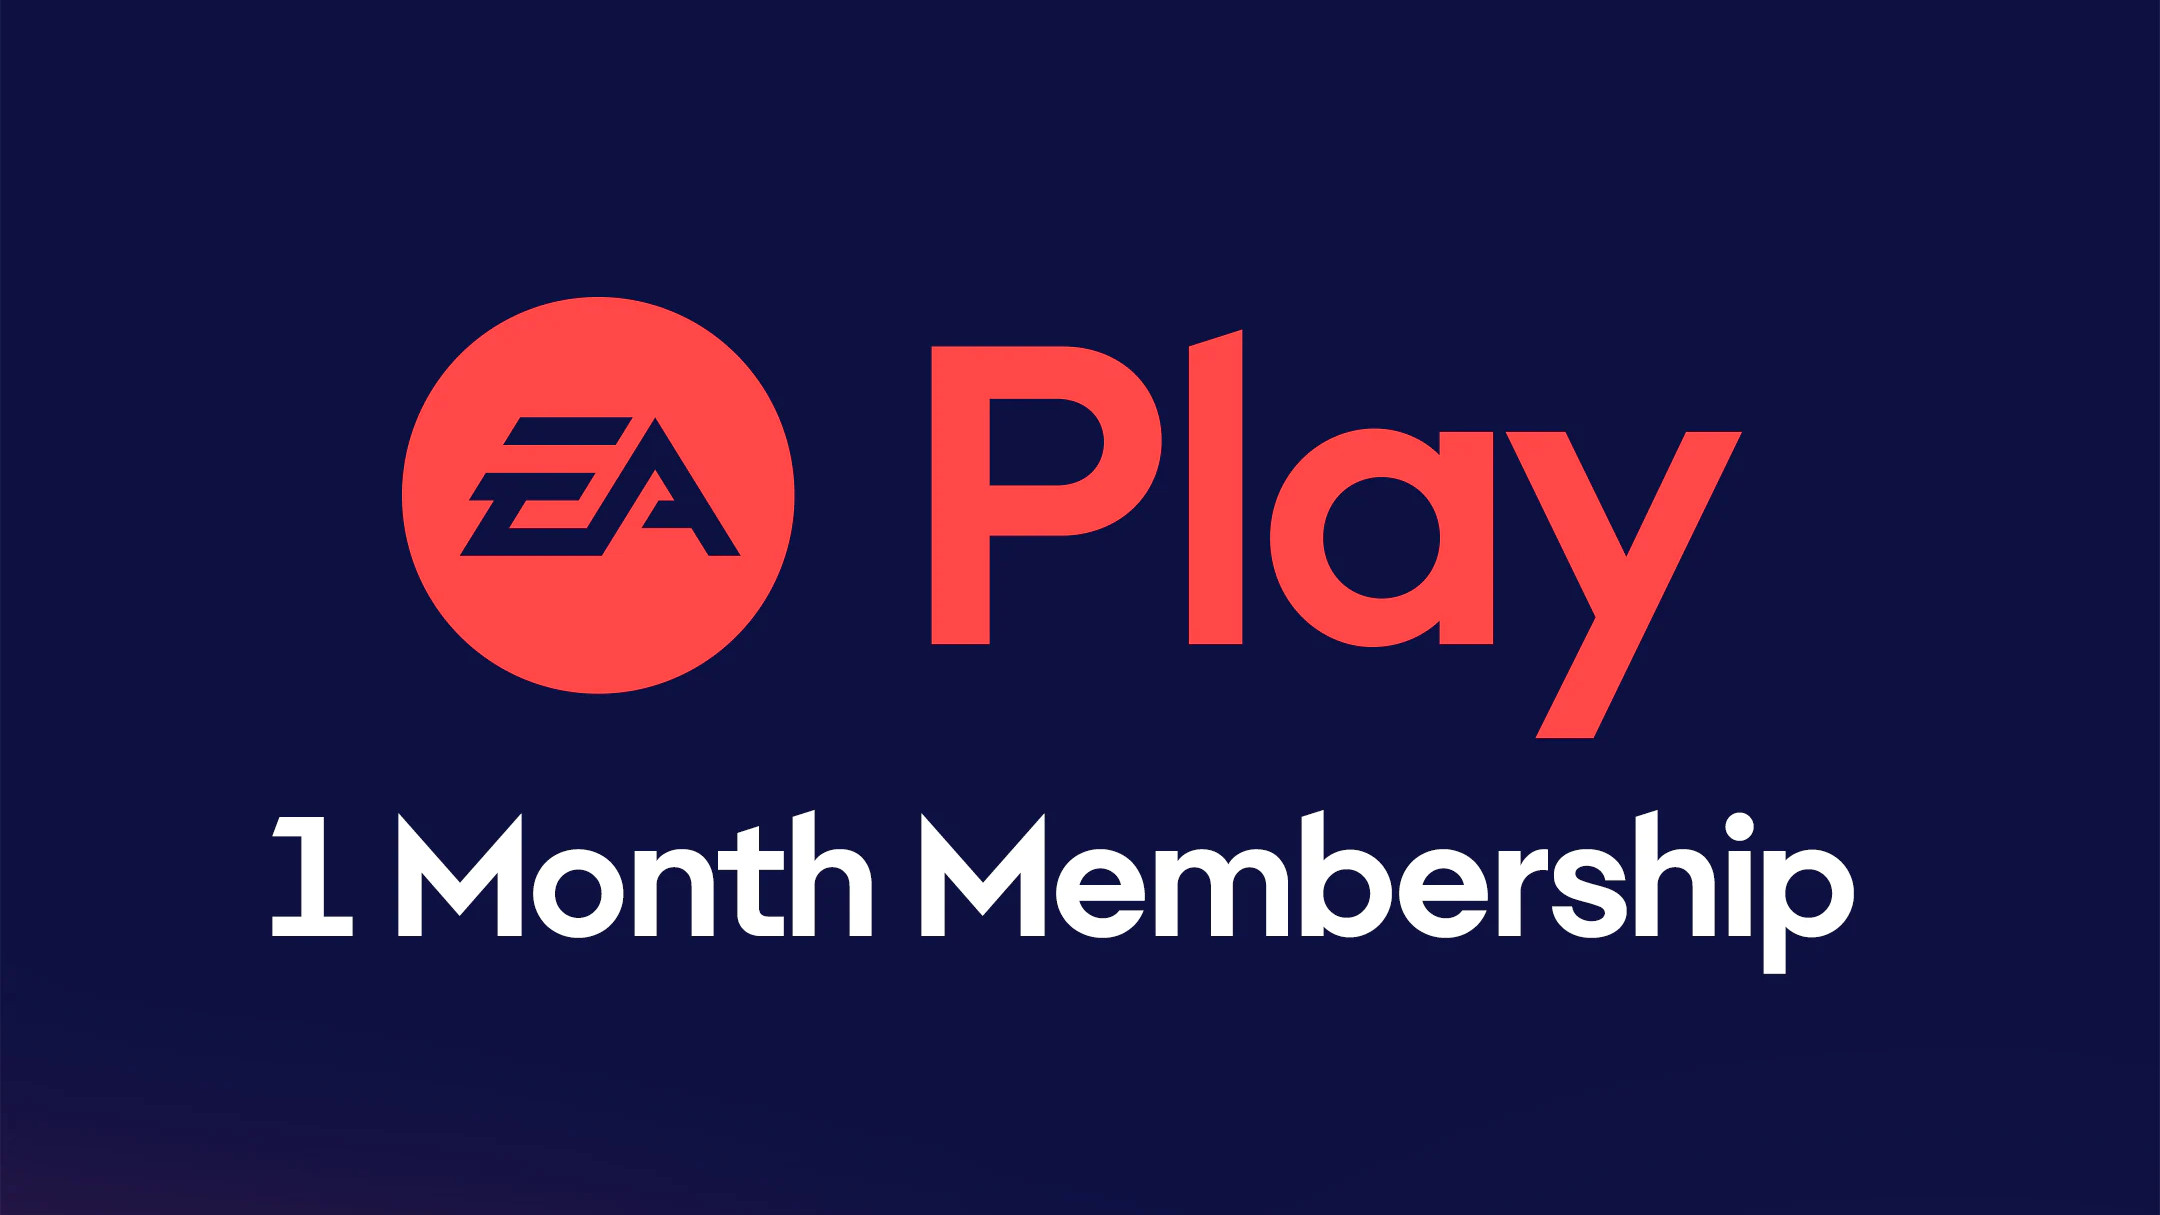 EA Play - 1 Month Subscription Key 20.31 USD